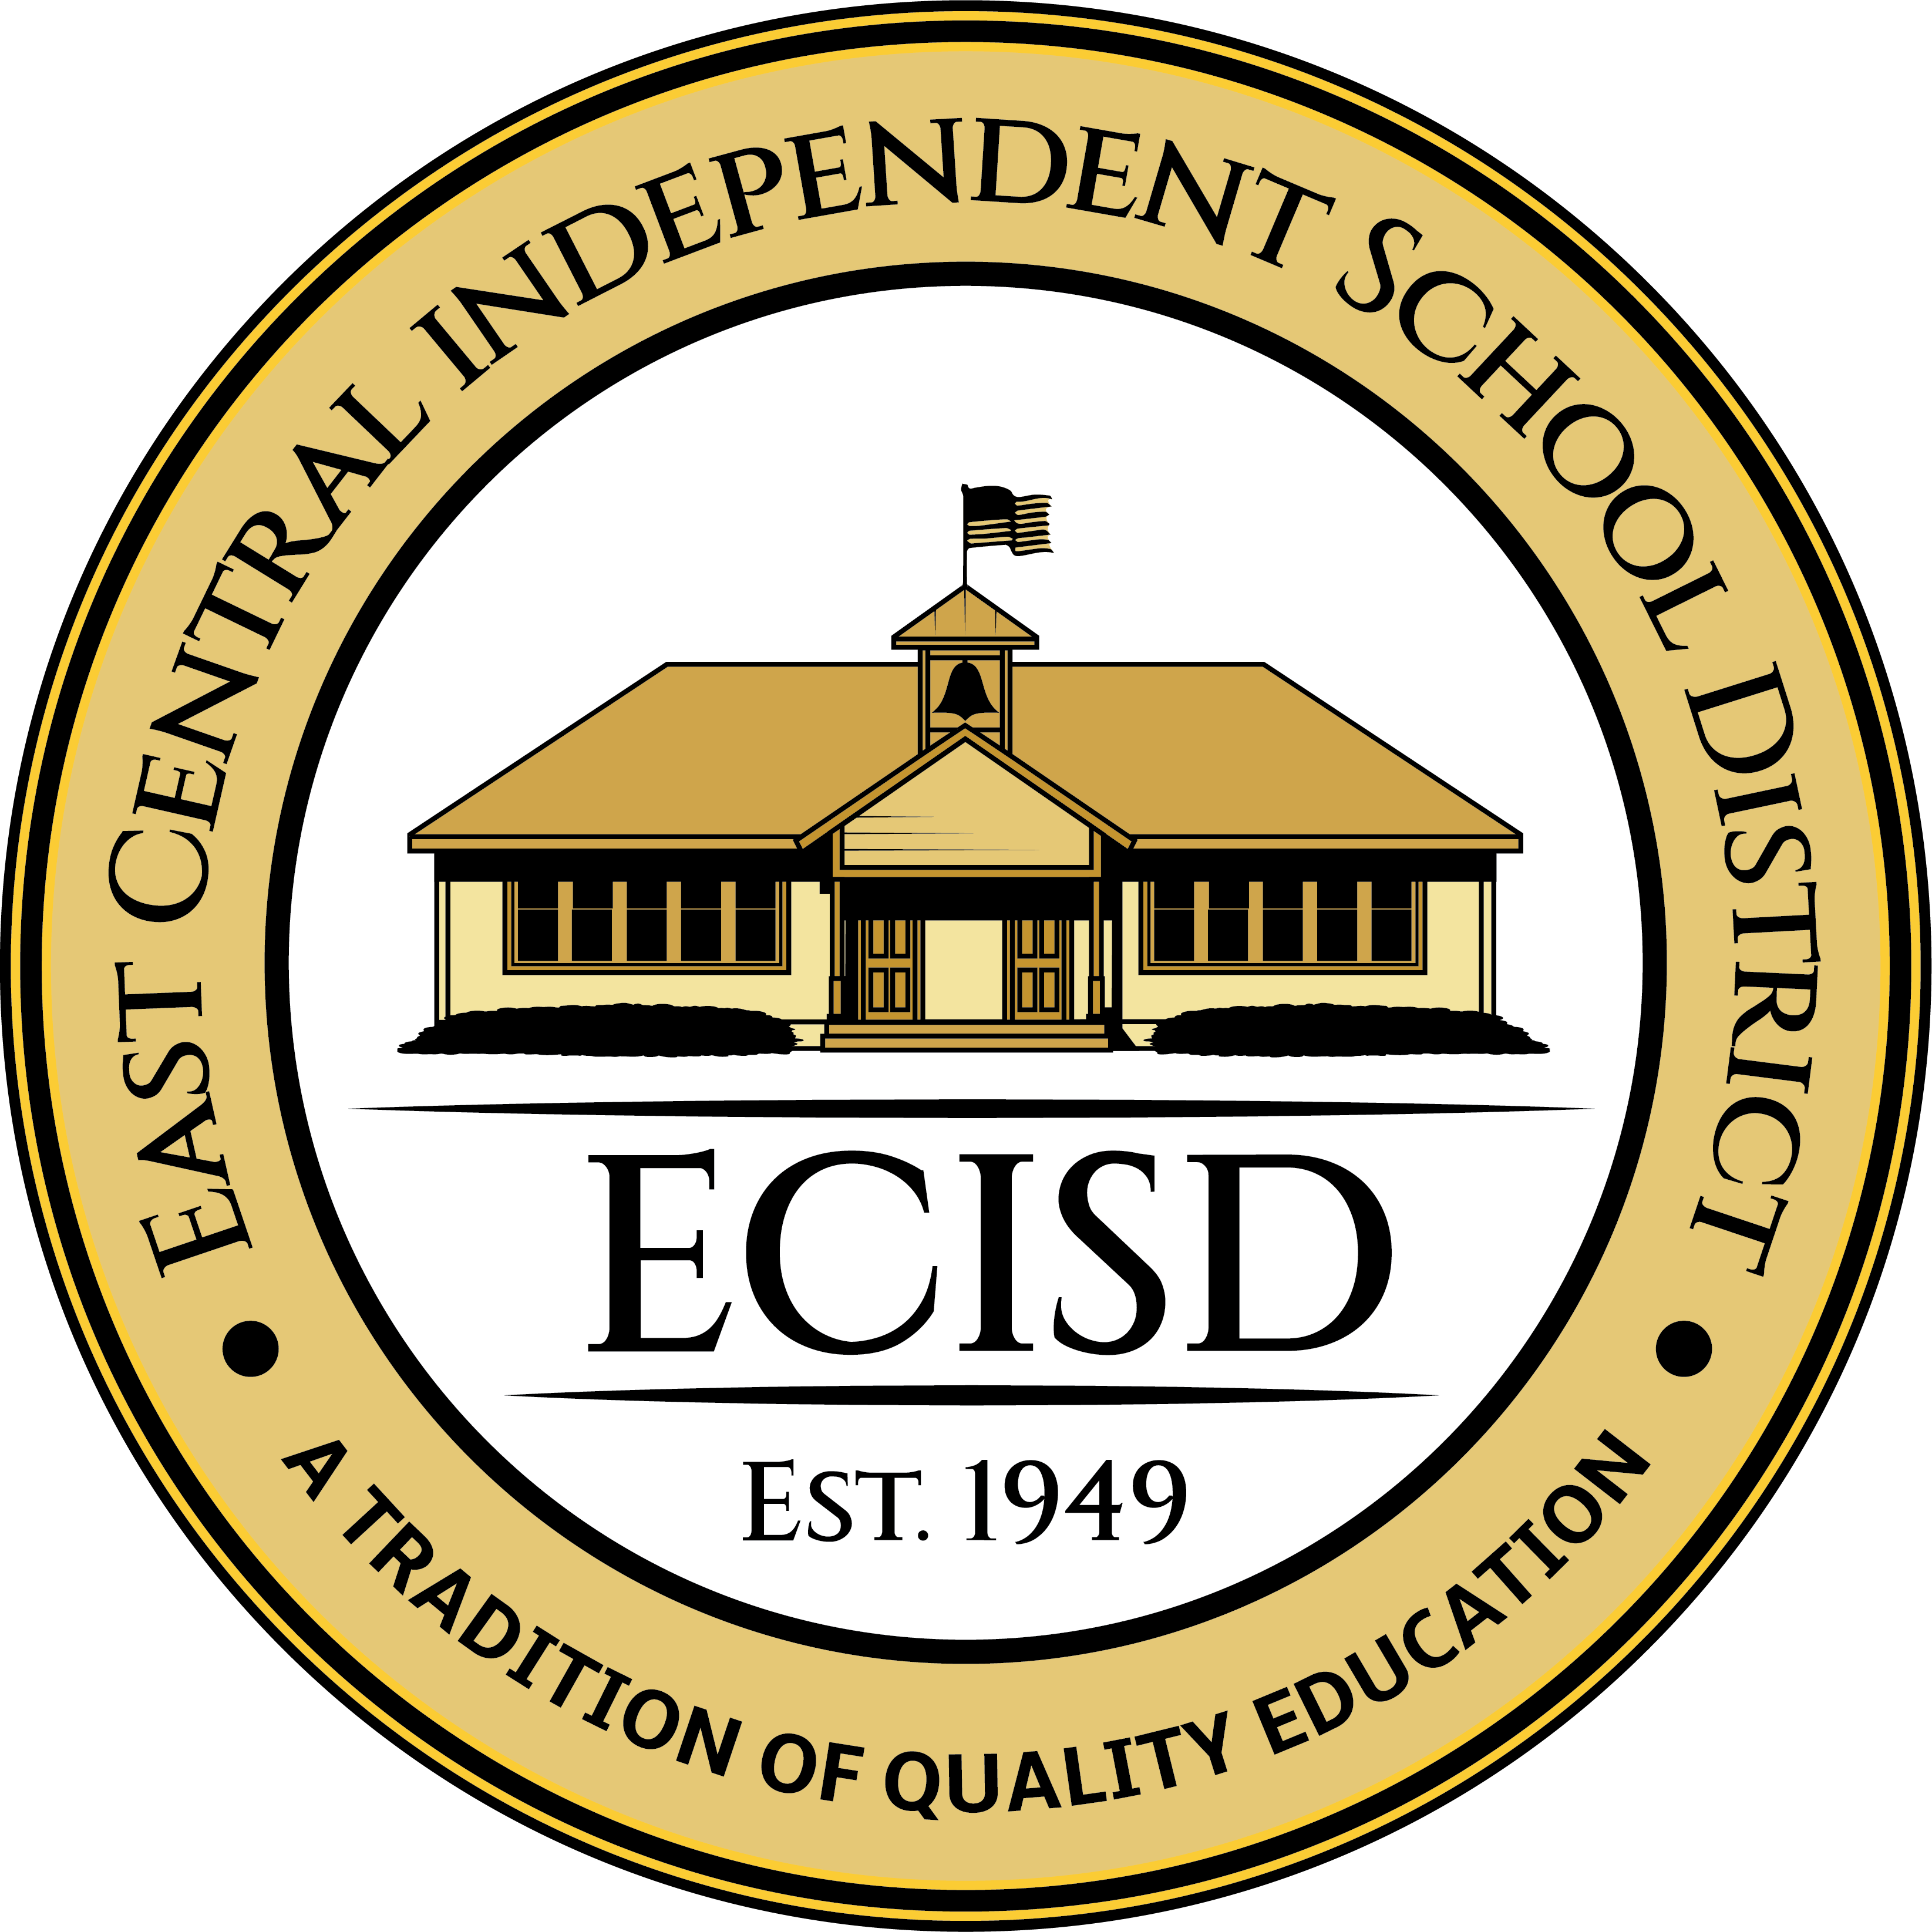 East Central ISD